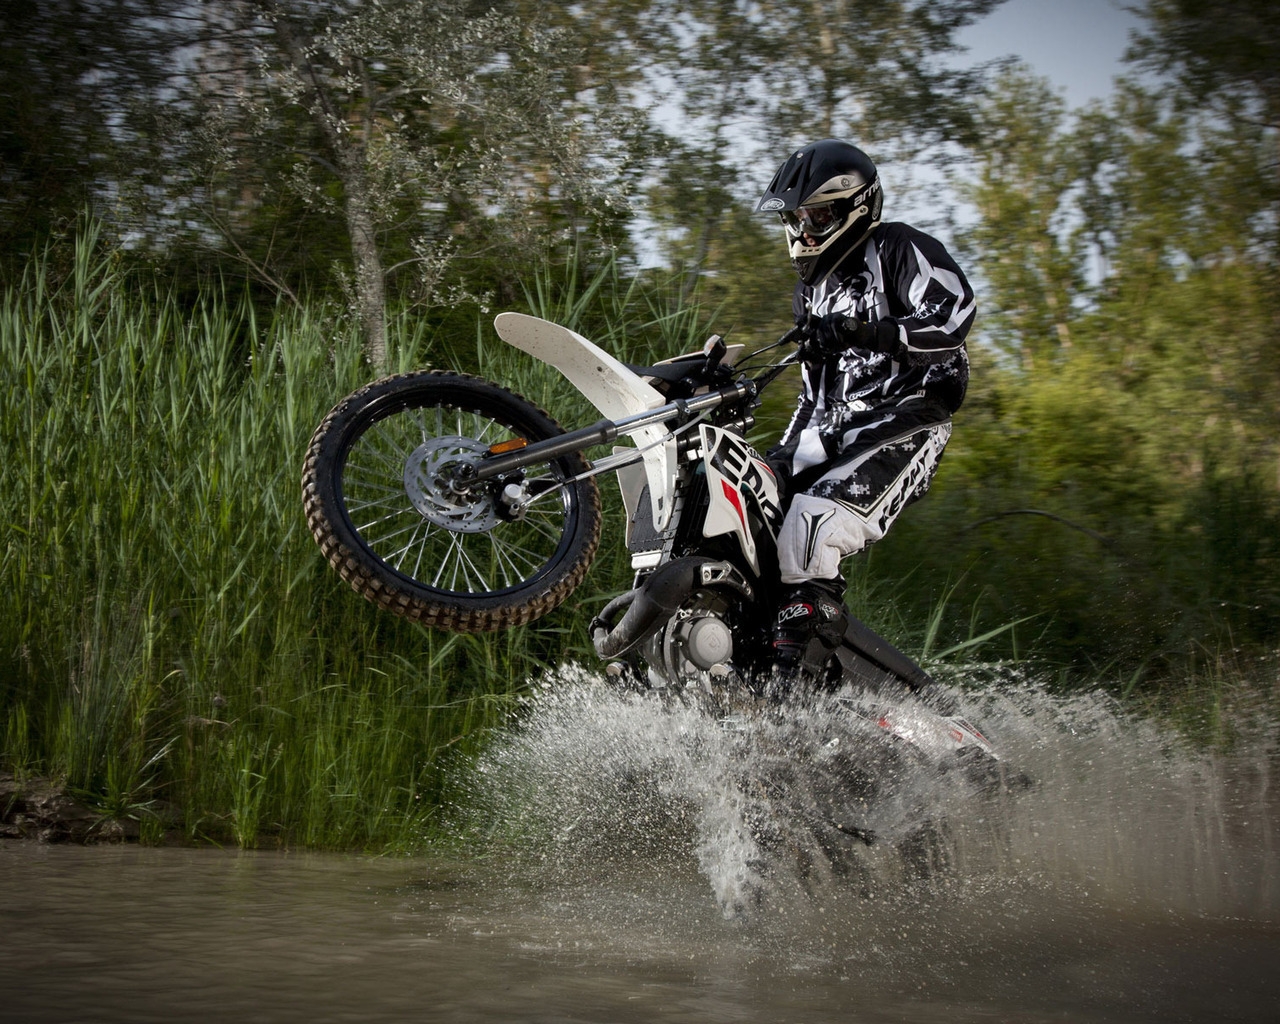 Motorcycle Obstacle Race for 1280 x 1024 resolution